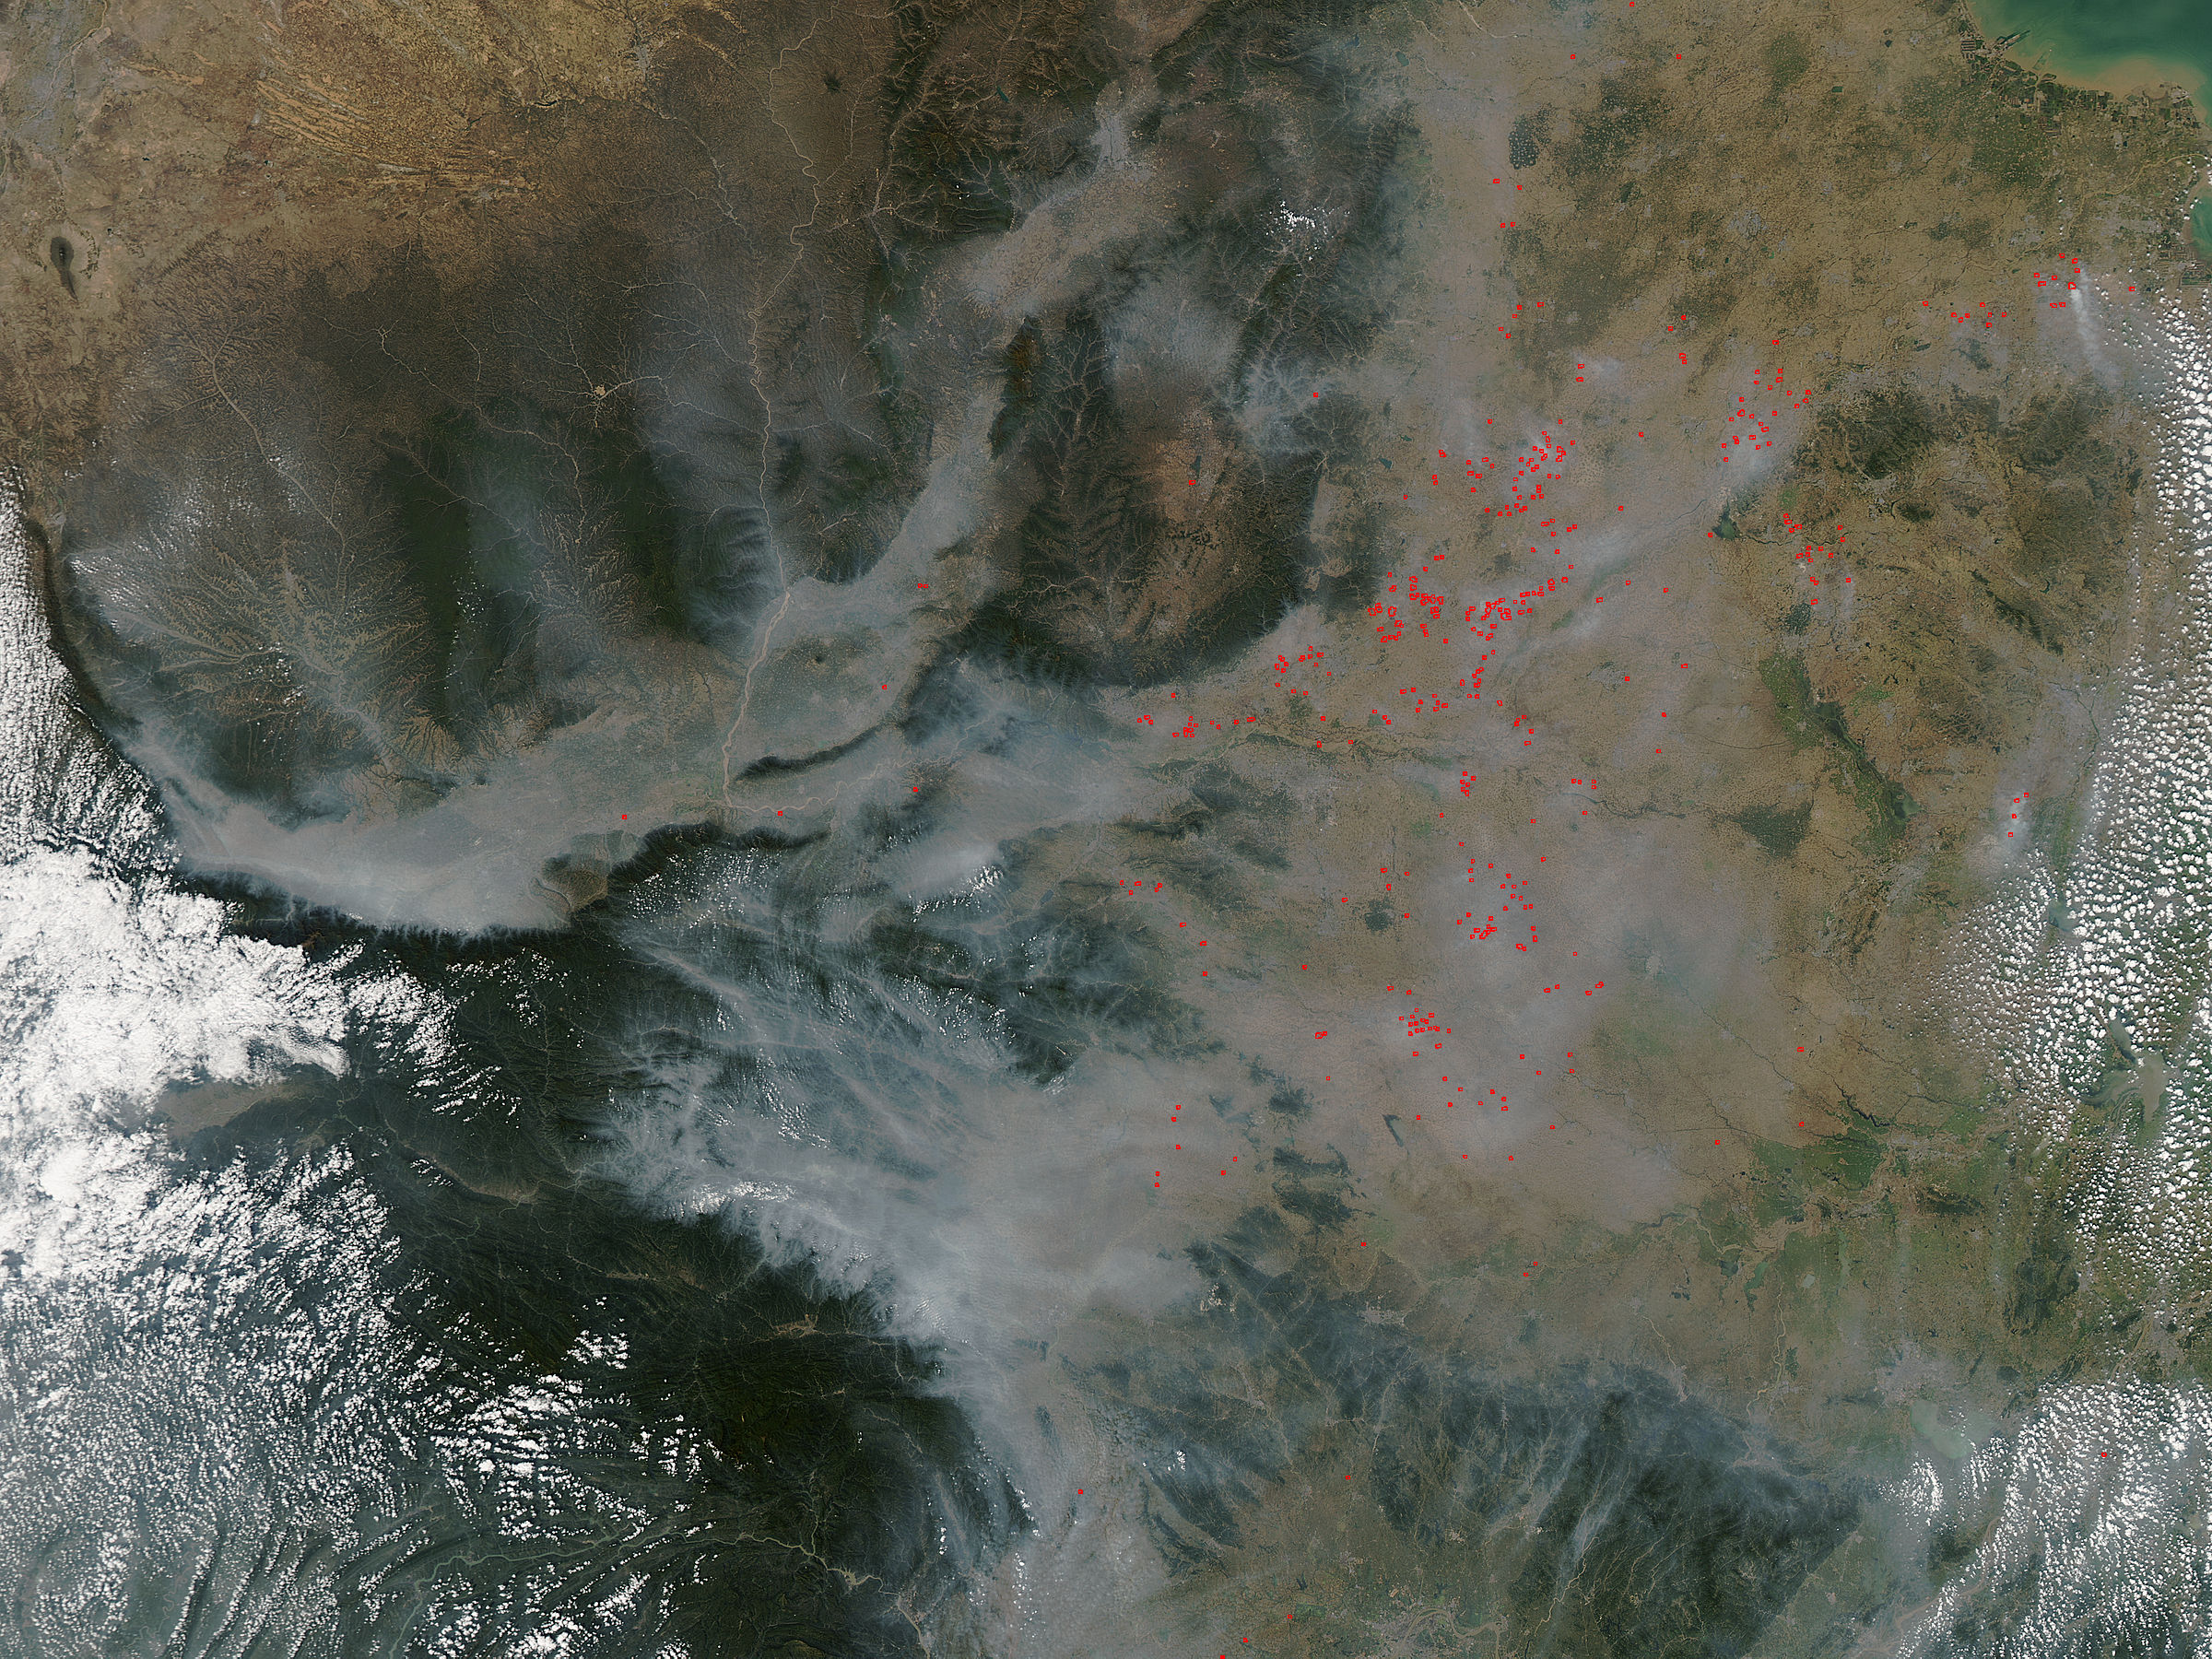 Fires, smoke, and haze in central China - related image preview